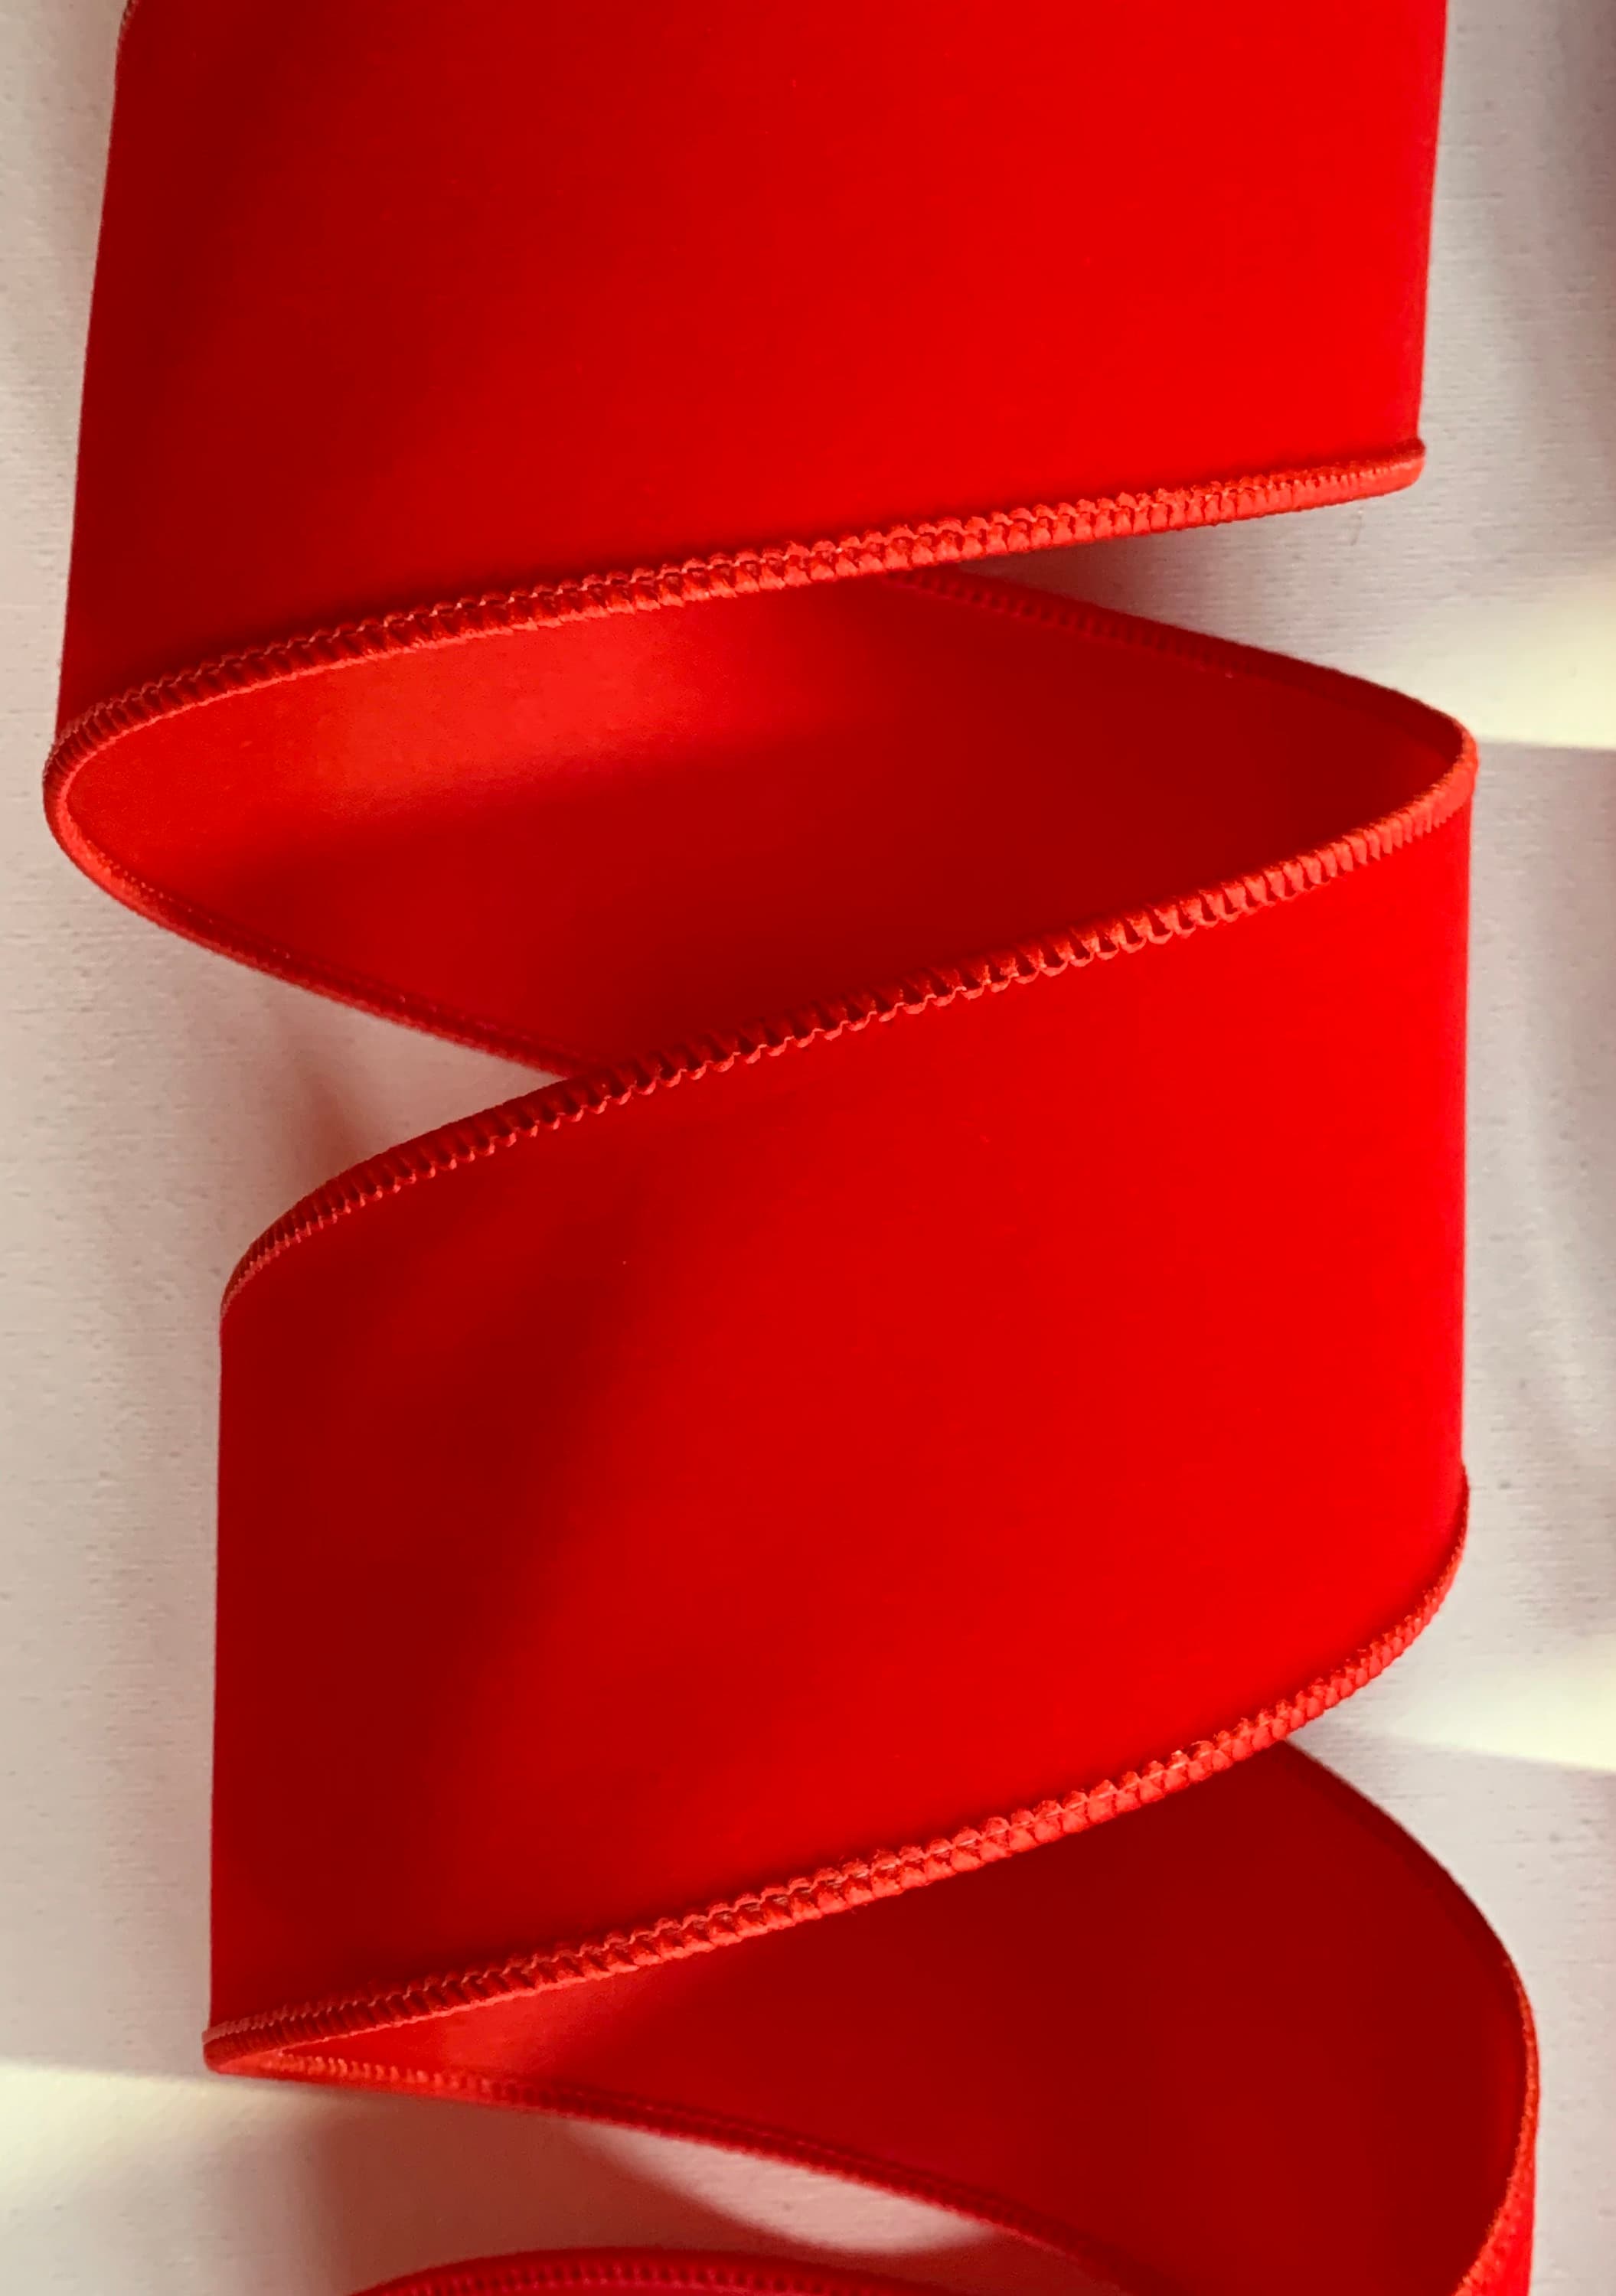 1.5 2.5 or 4 Bright Red or Scarlet / Brick Red Velvet Ribbon Wired Edges 10  Yard Roll or 50 Yard Roll 